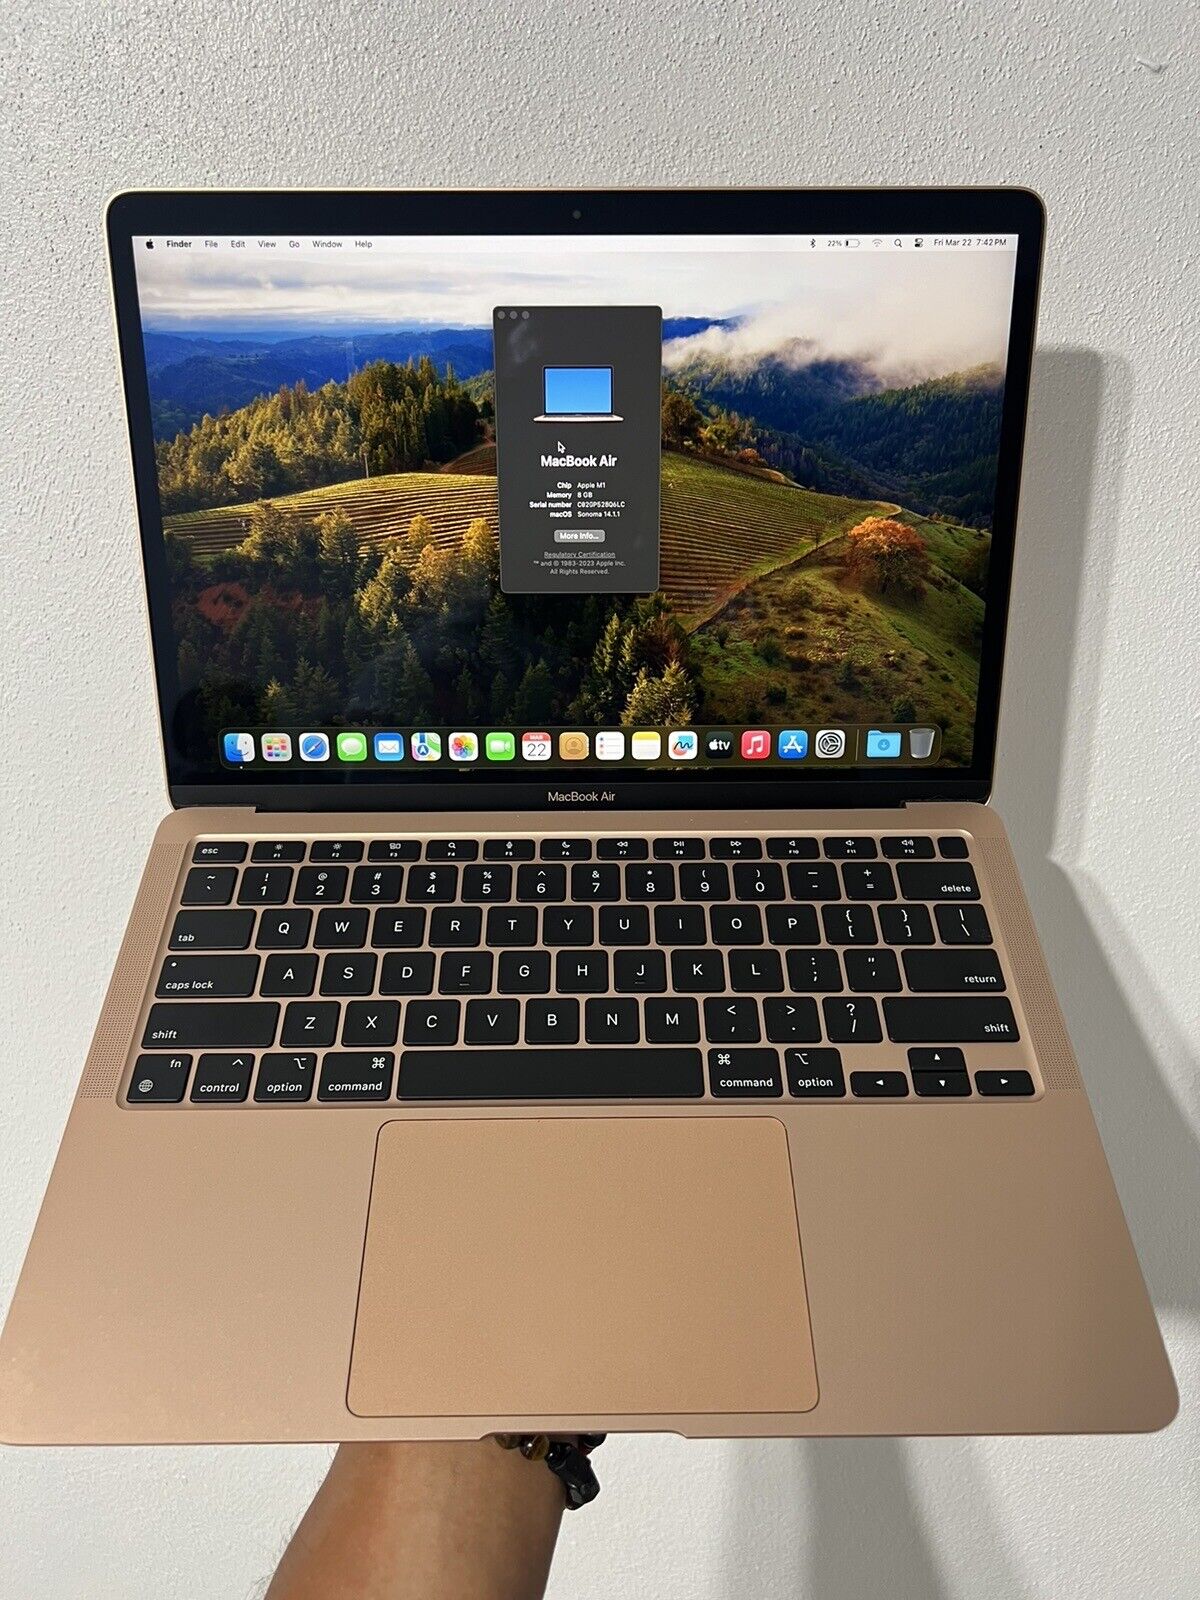 Macbook Air M1 Photoshop2023,Ligthroom2022, autoCad,Premiere2023And More